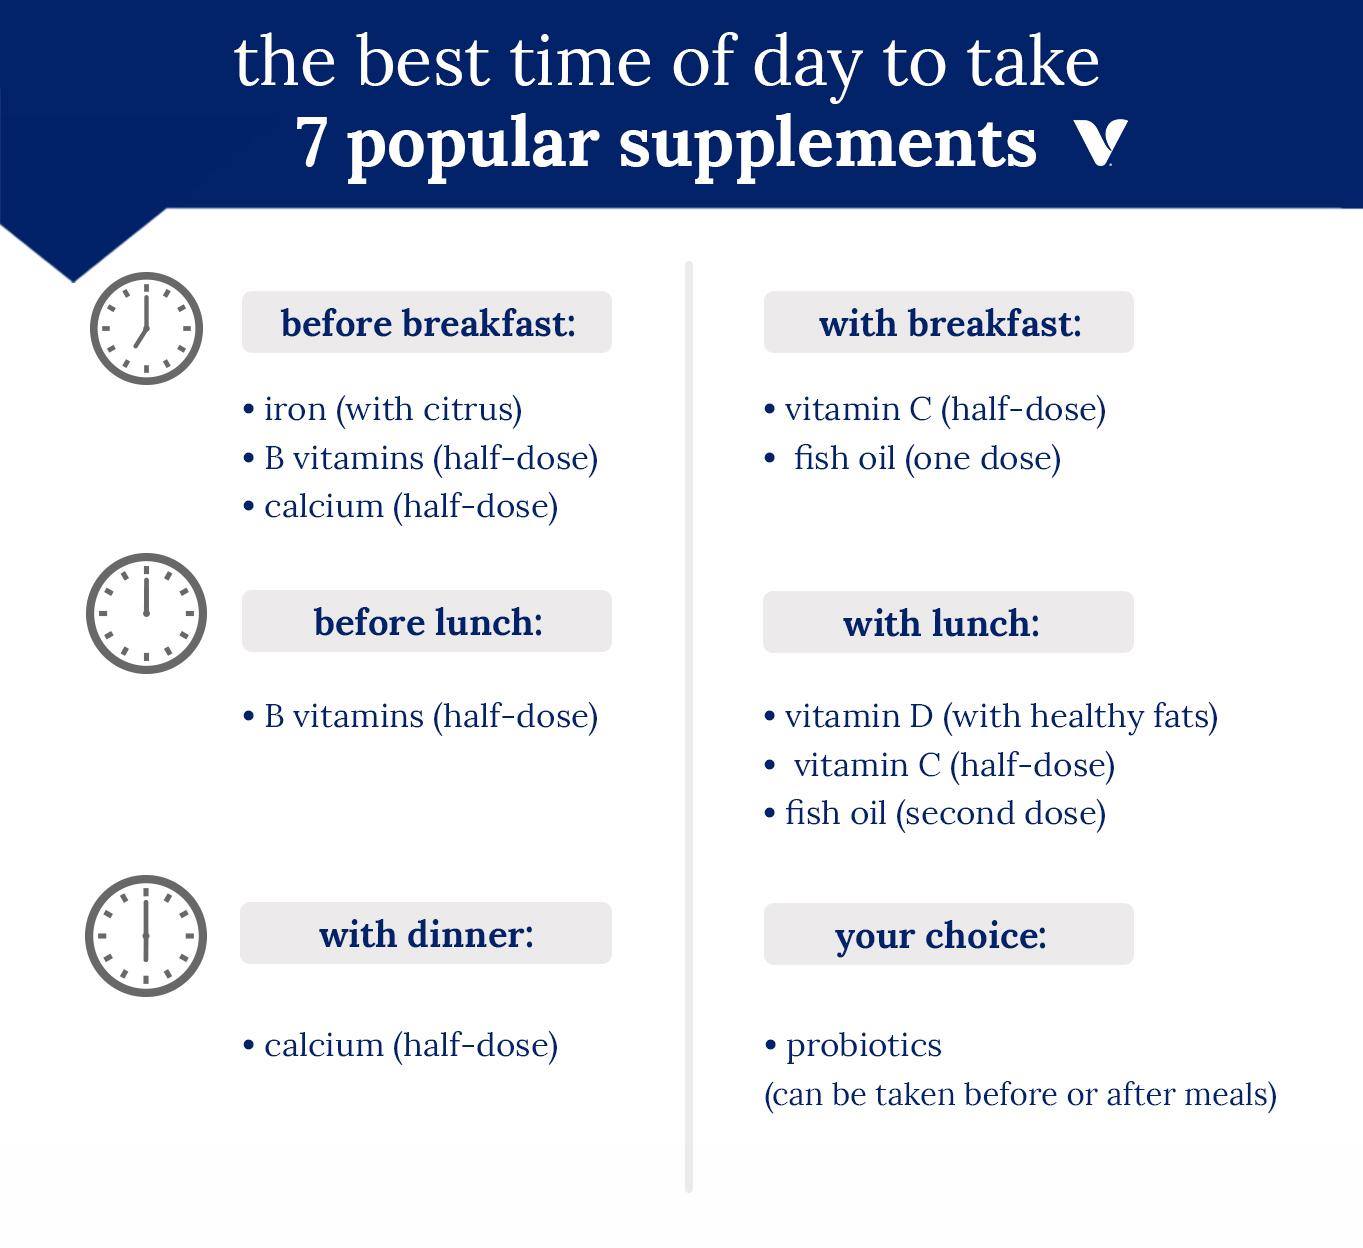 The Best Time to Take Supplements